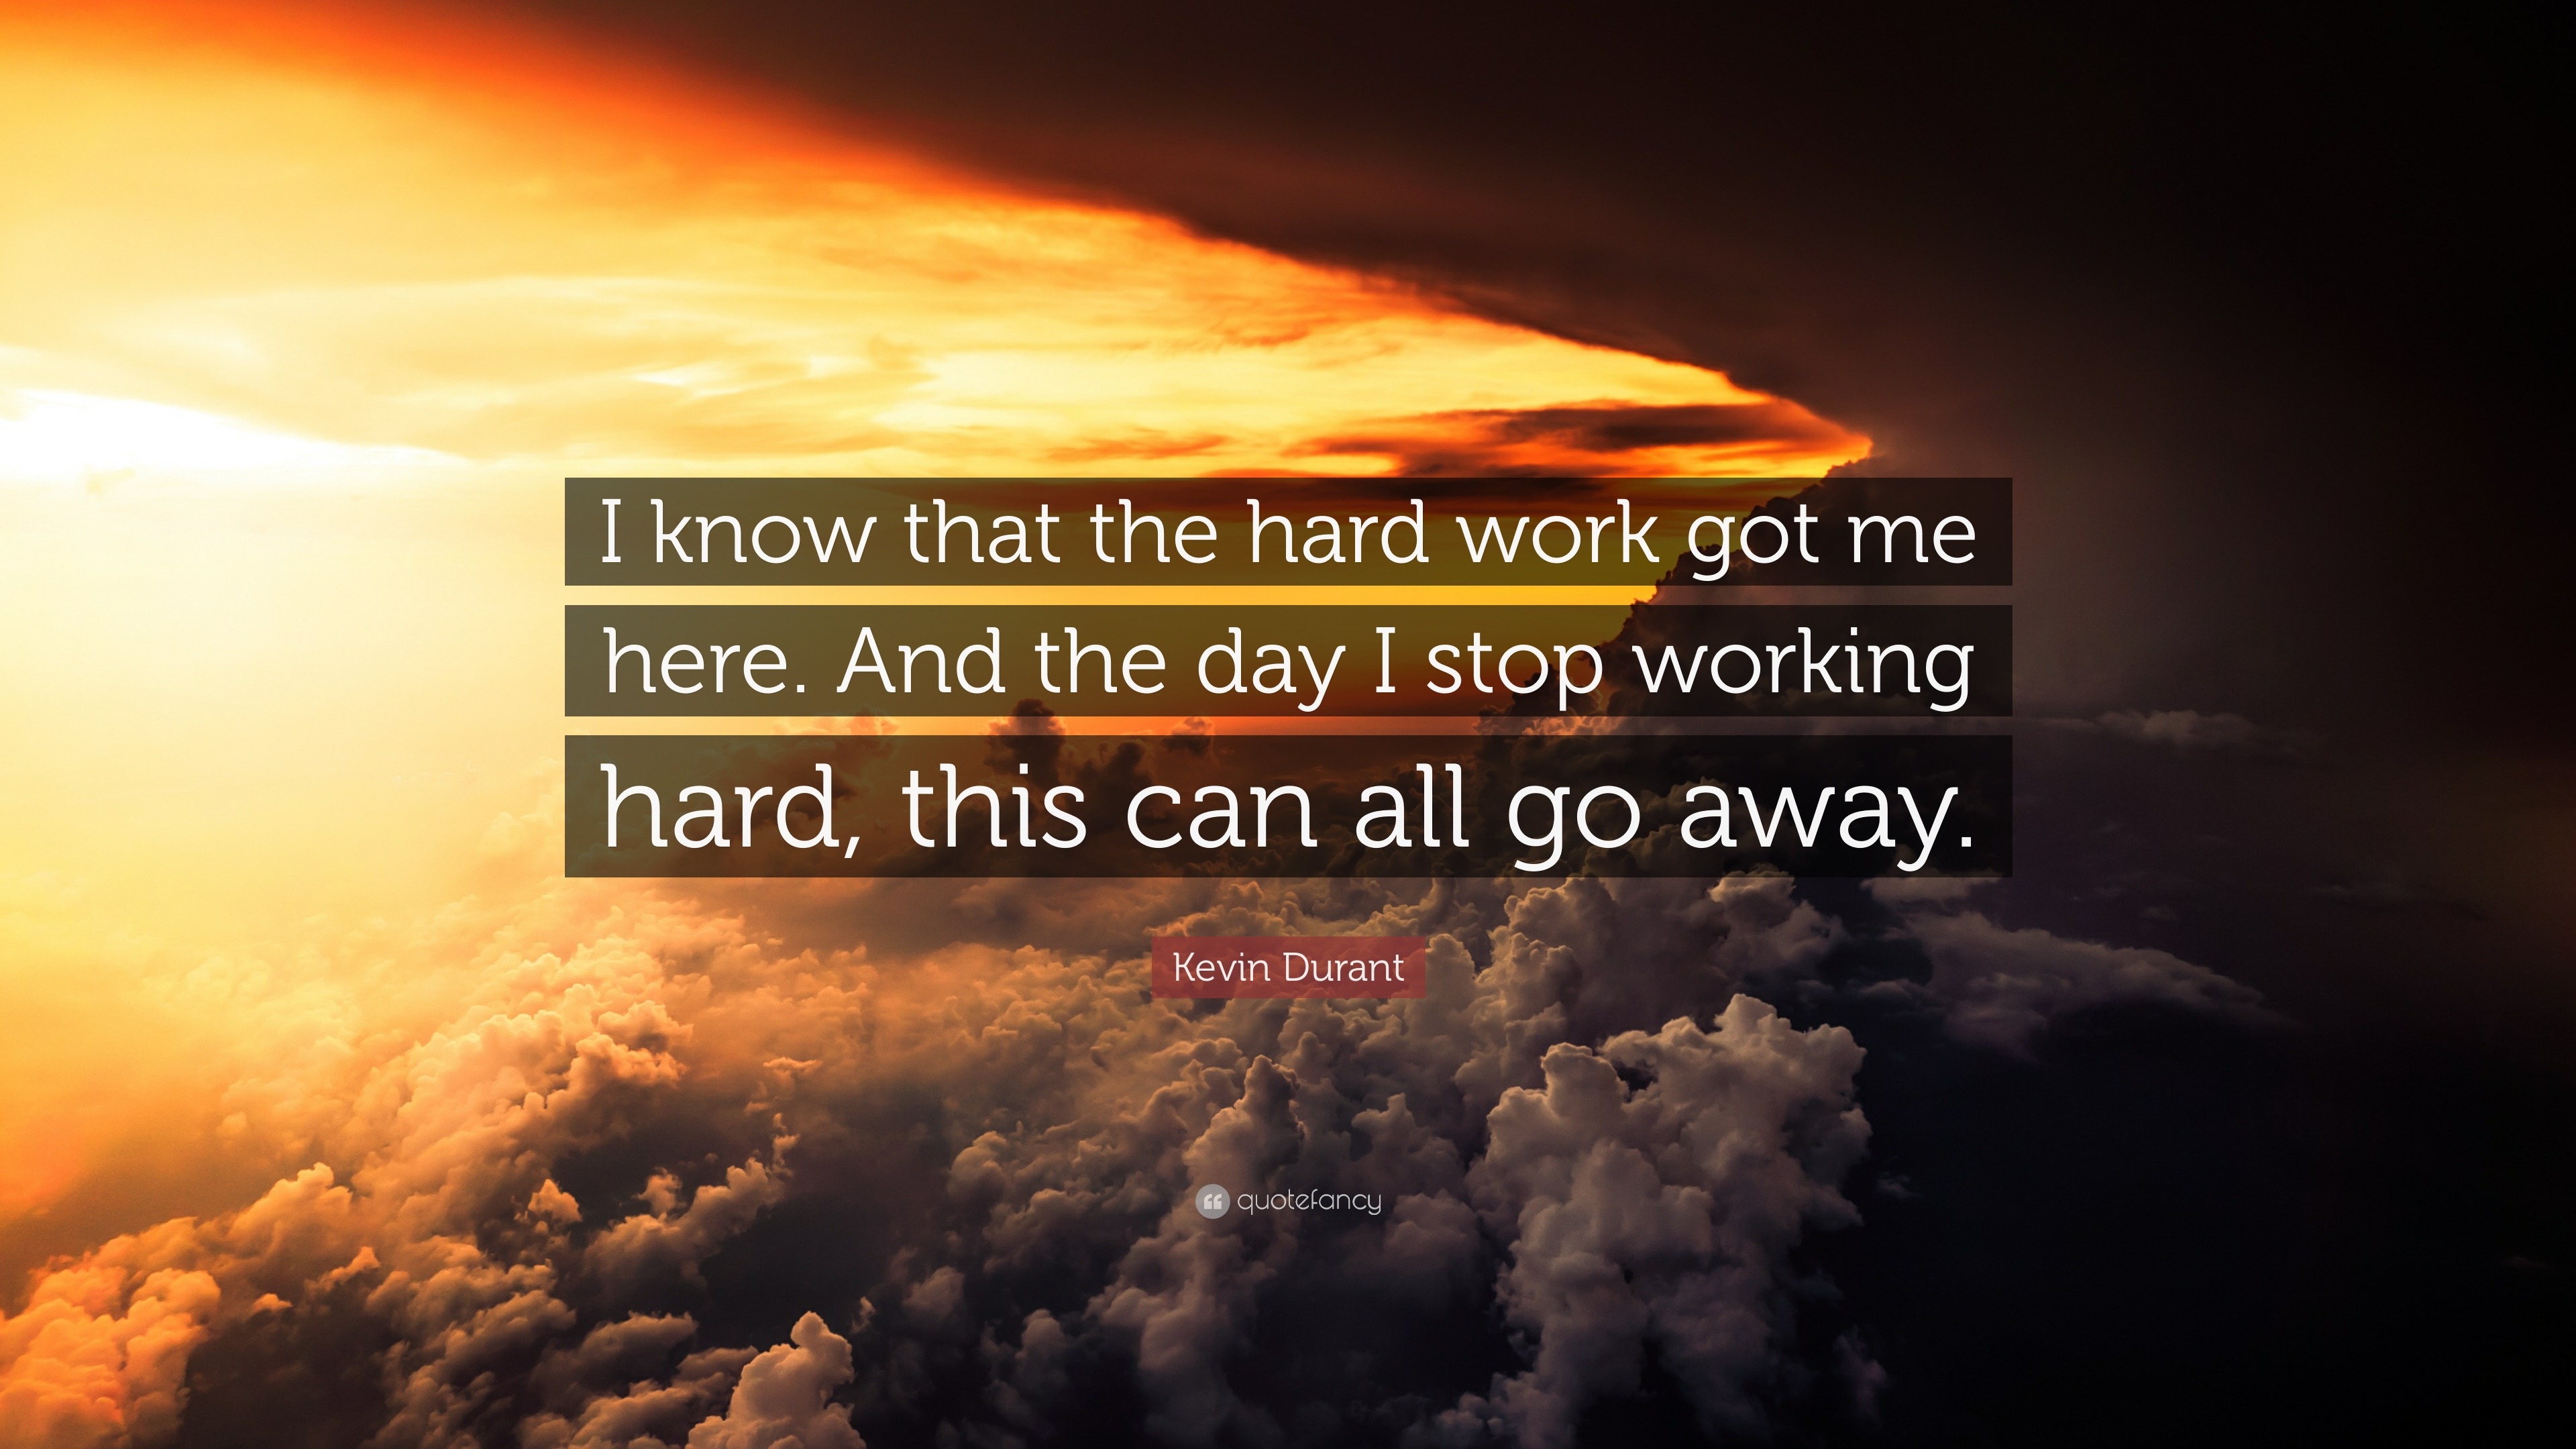 Kevin Durant Quote: "I know that the hard work got me here ...